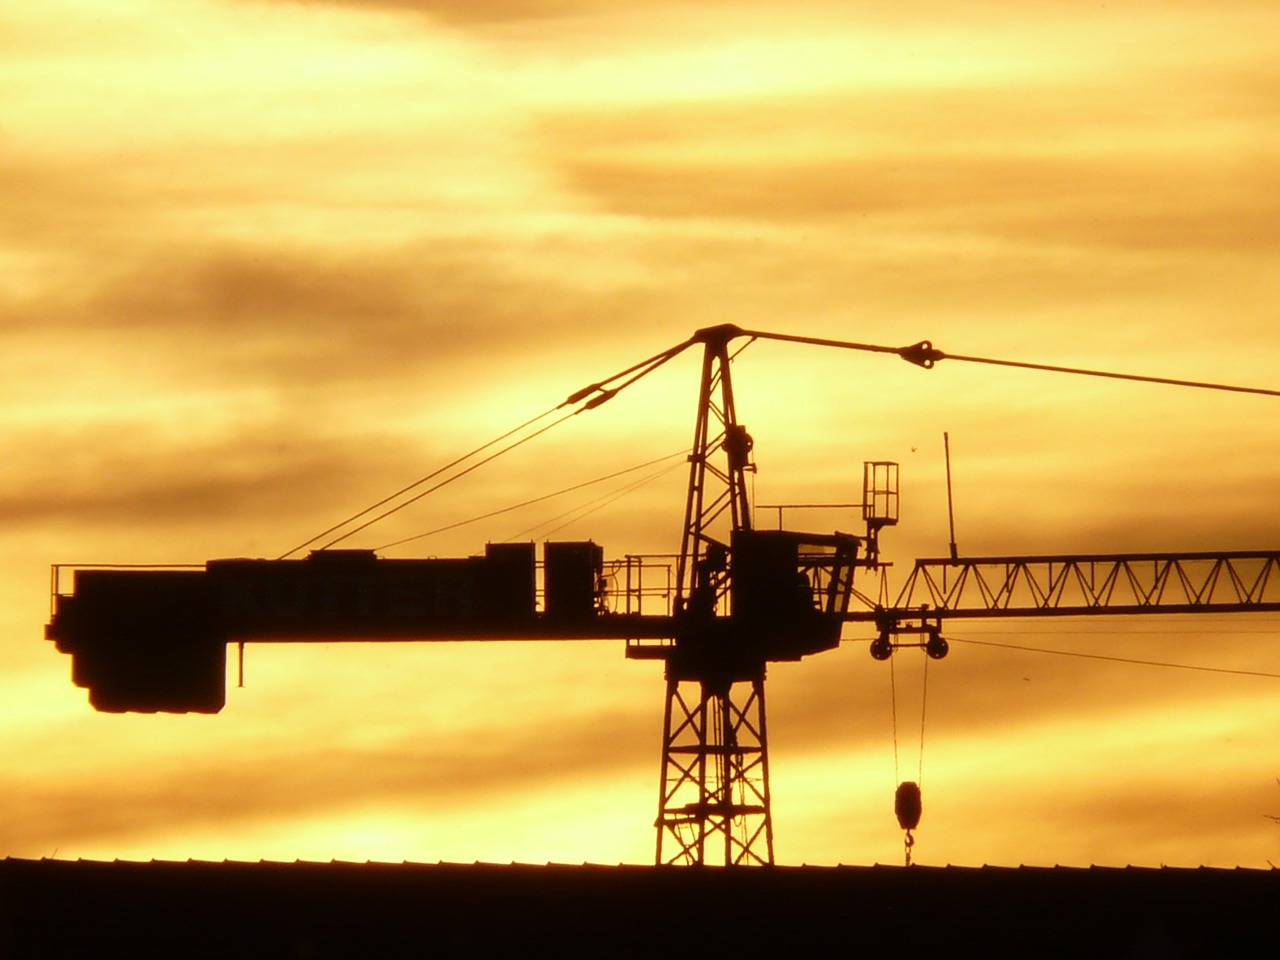 baukran,crane,technology,sunset,back light,site,golden,free pictures, free photos, free images, royalty free, free illustrations, public domain